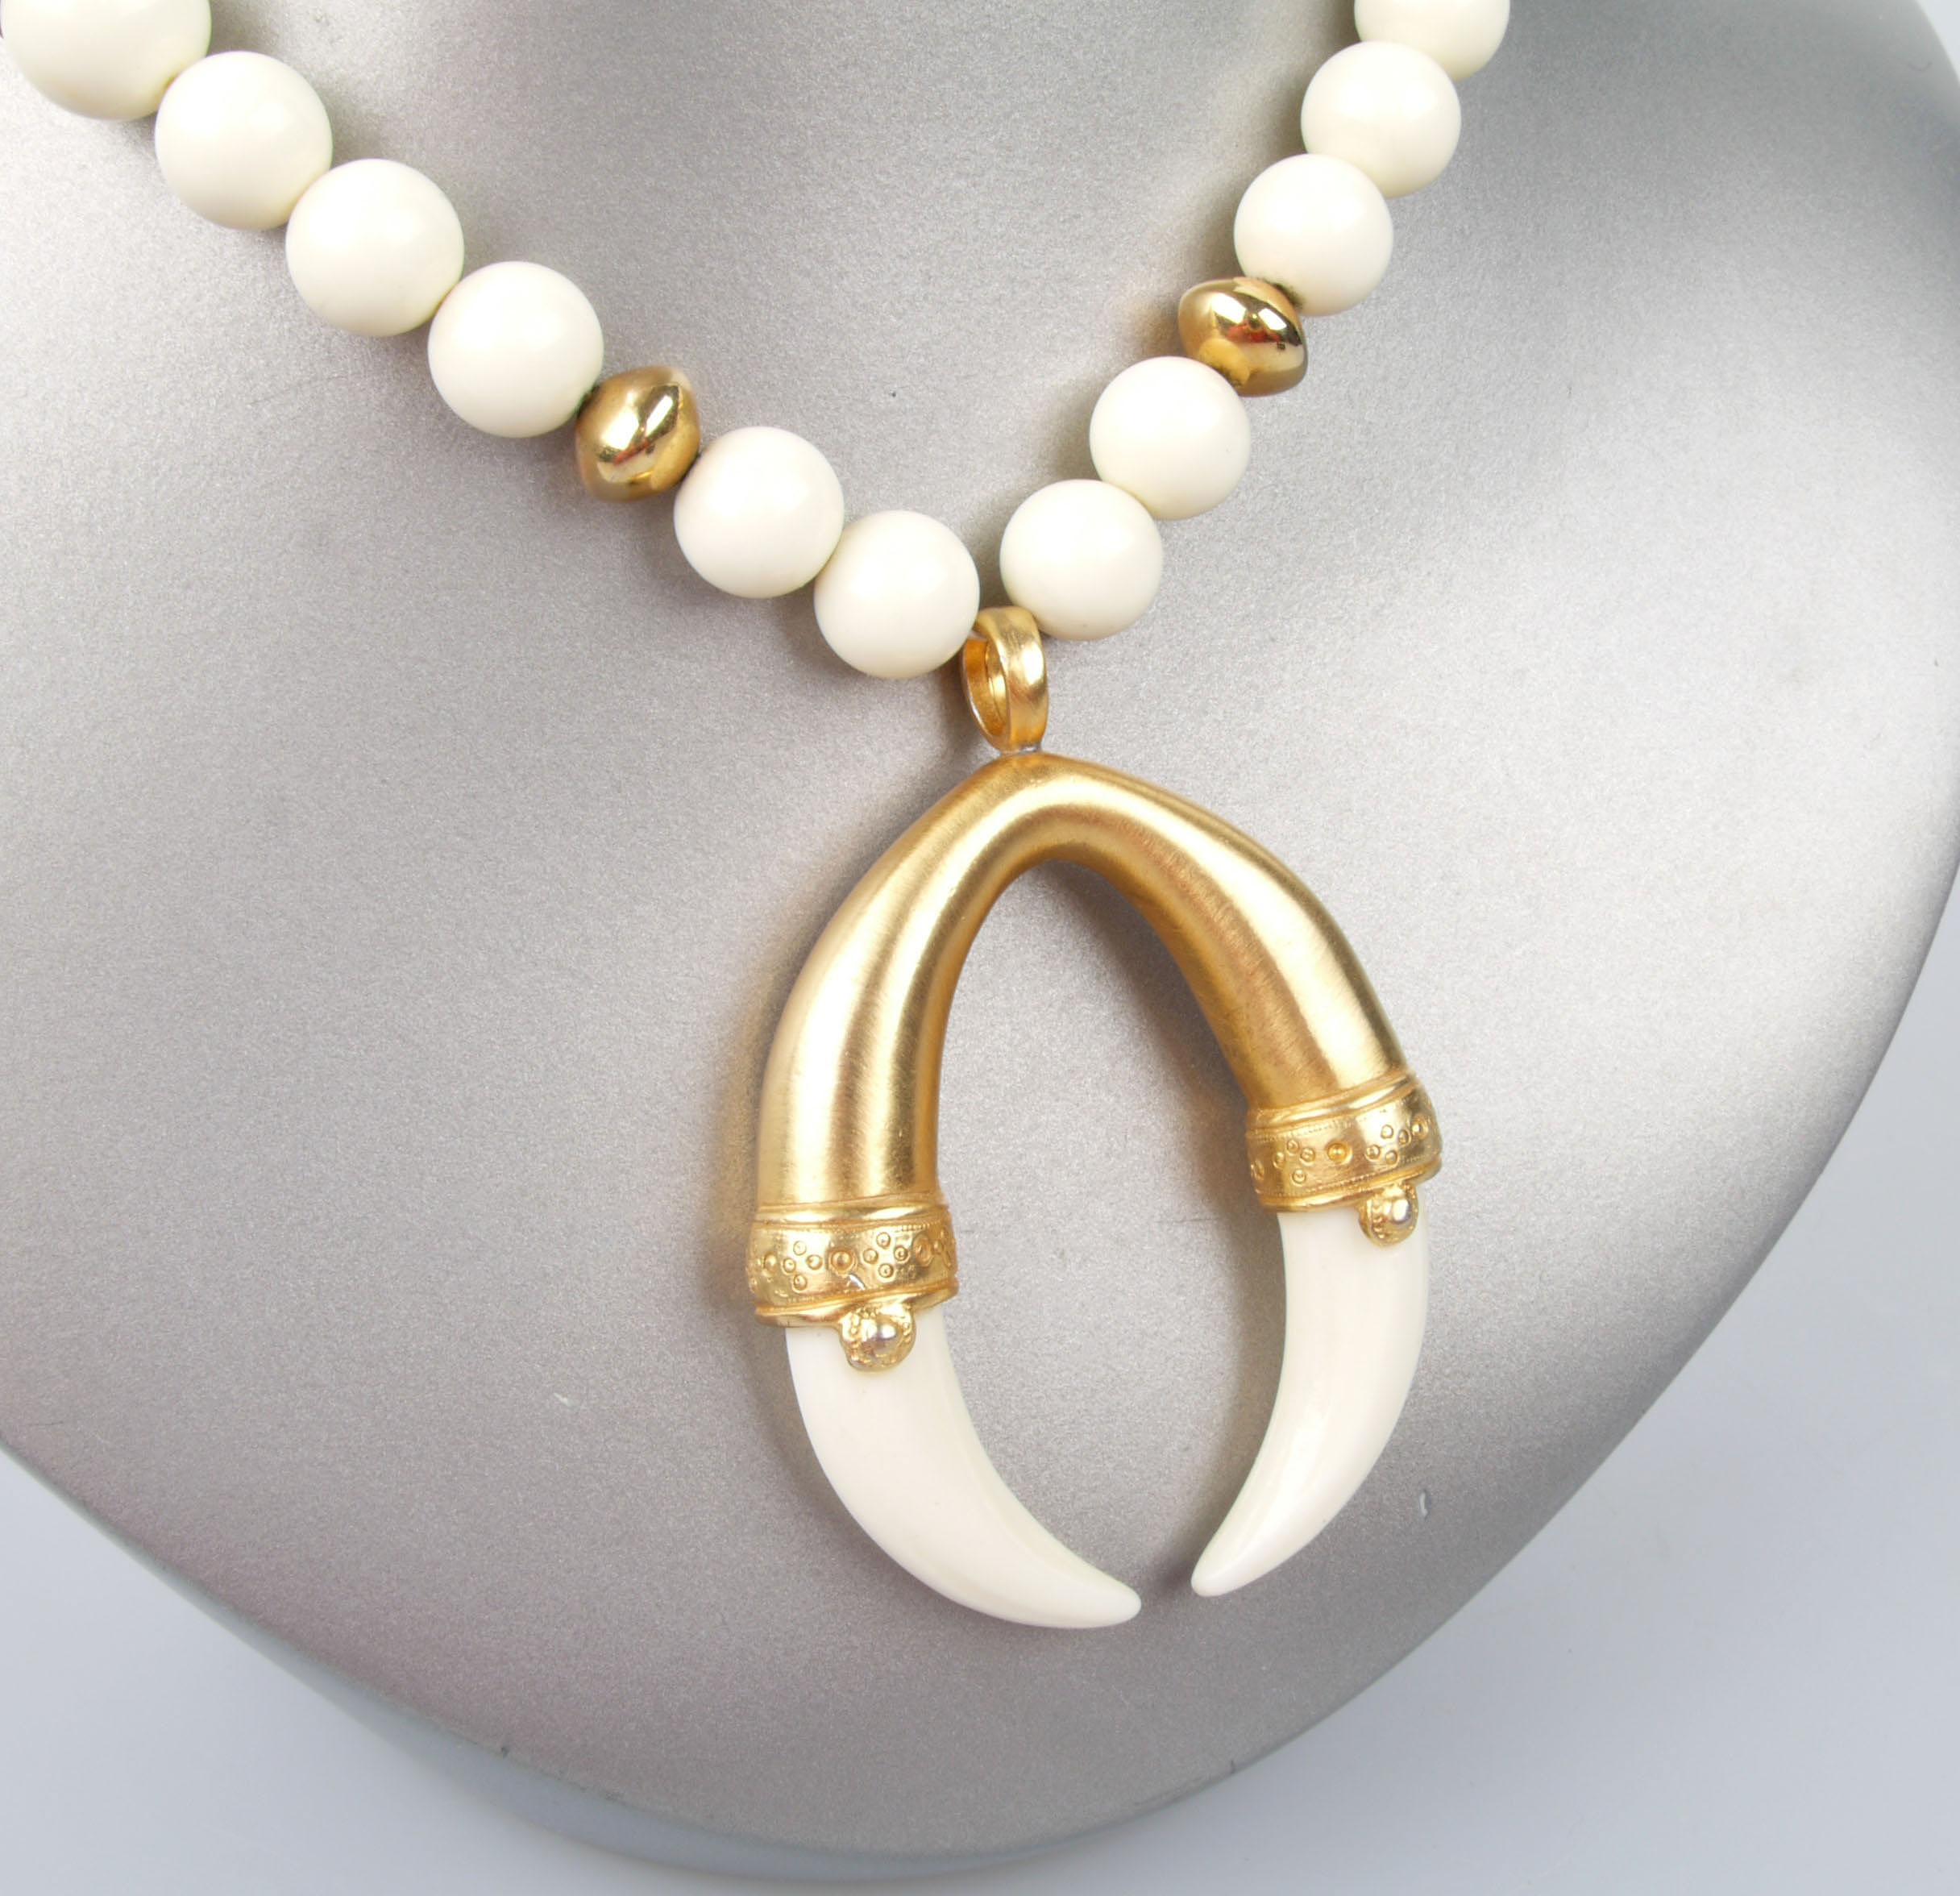 Modern White and Golden Pearl Resin Necklace with Tusk Pendant In Good Condition For Sale In Miami, FL